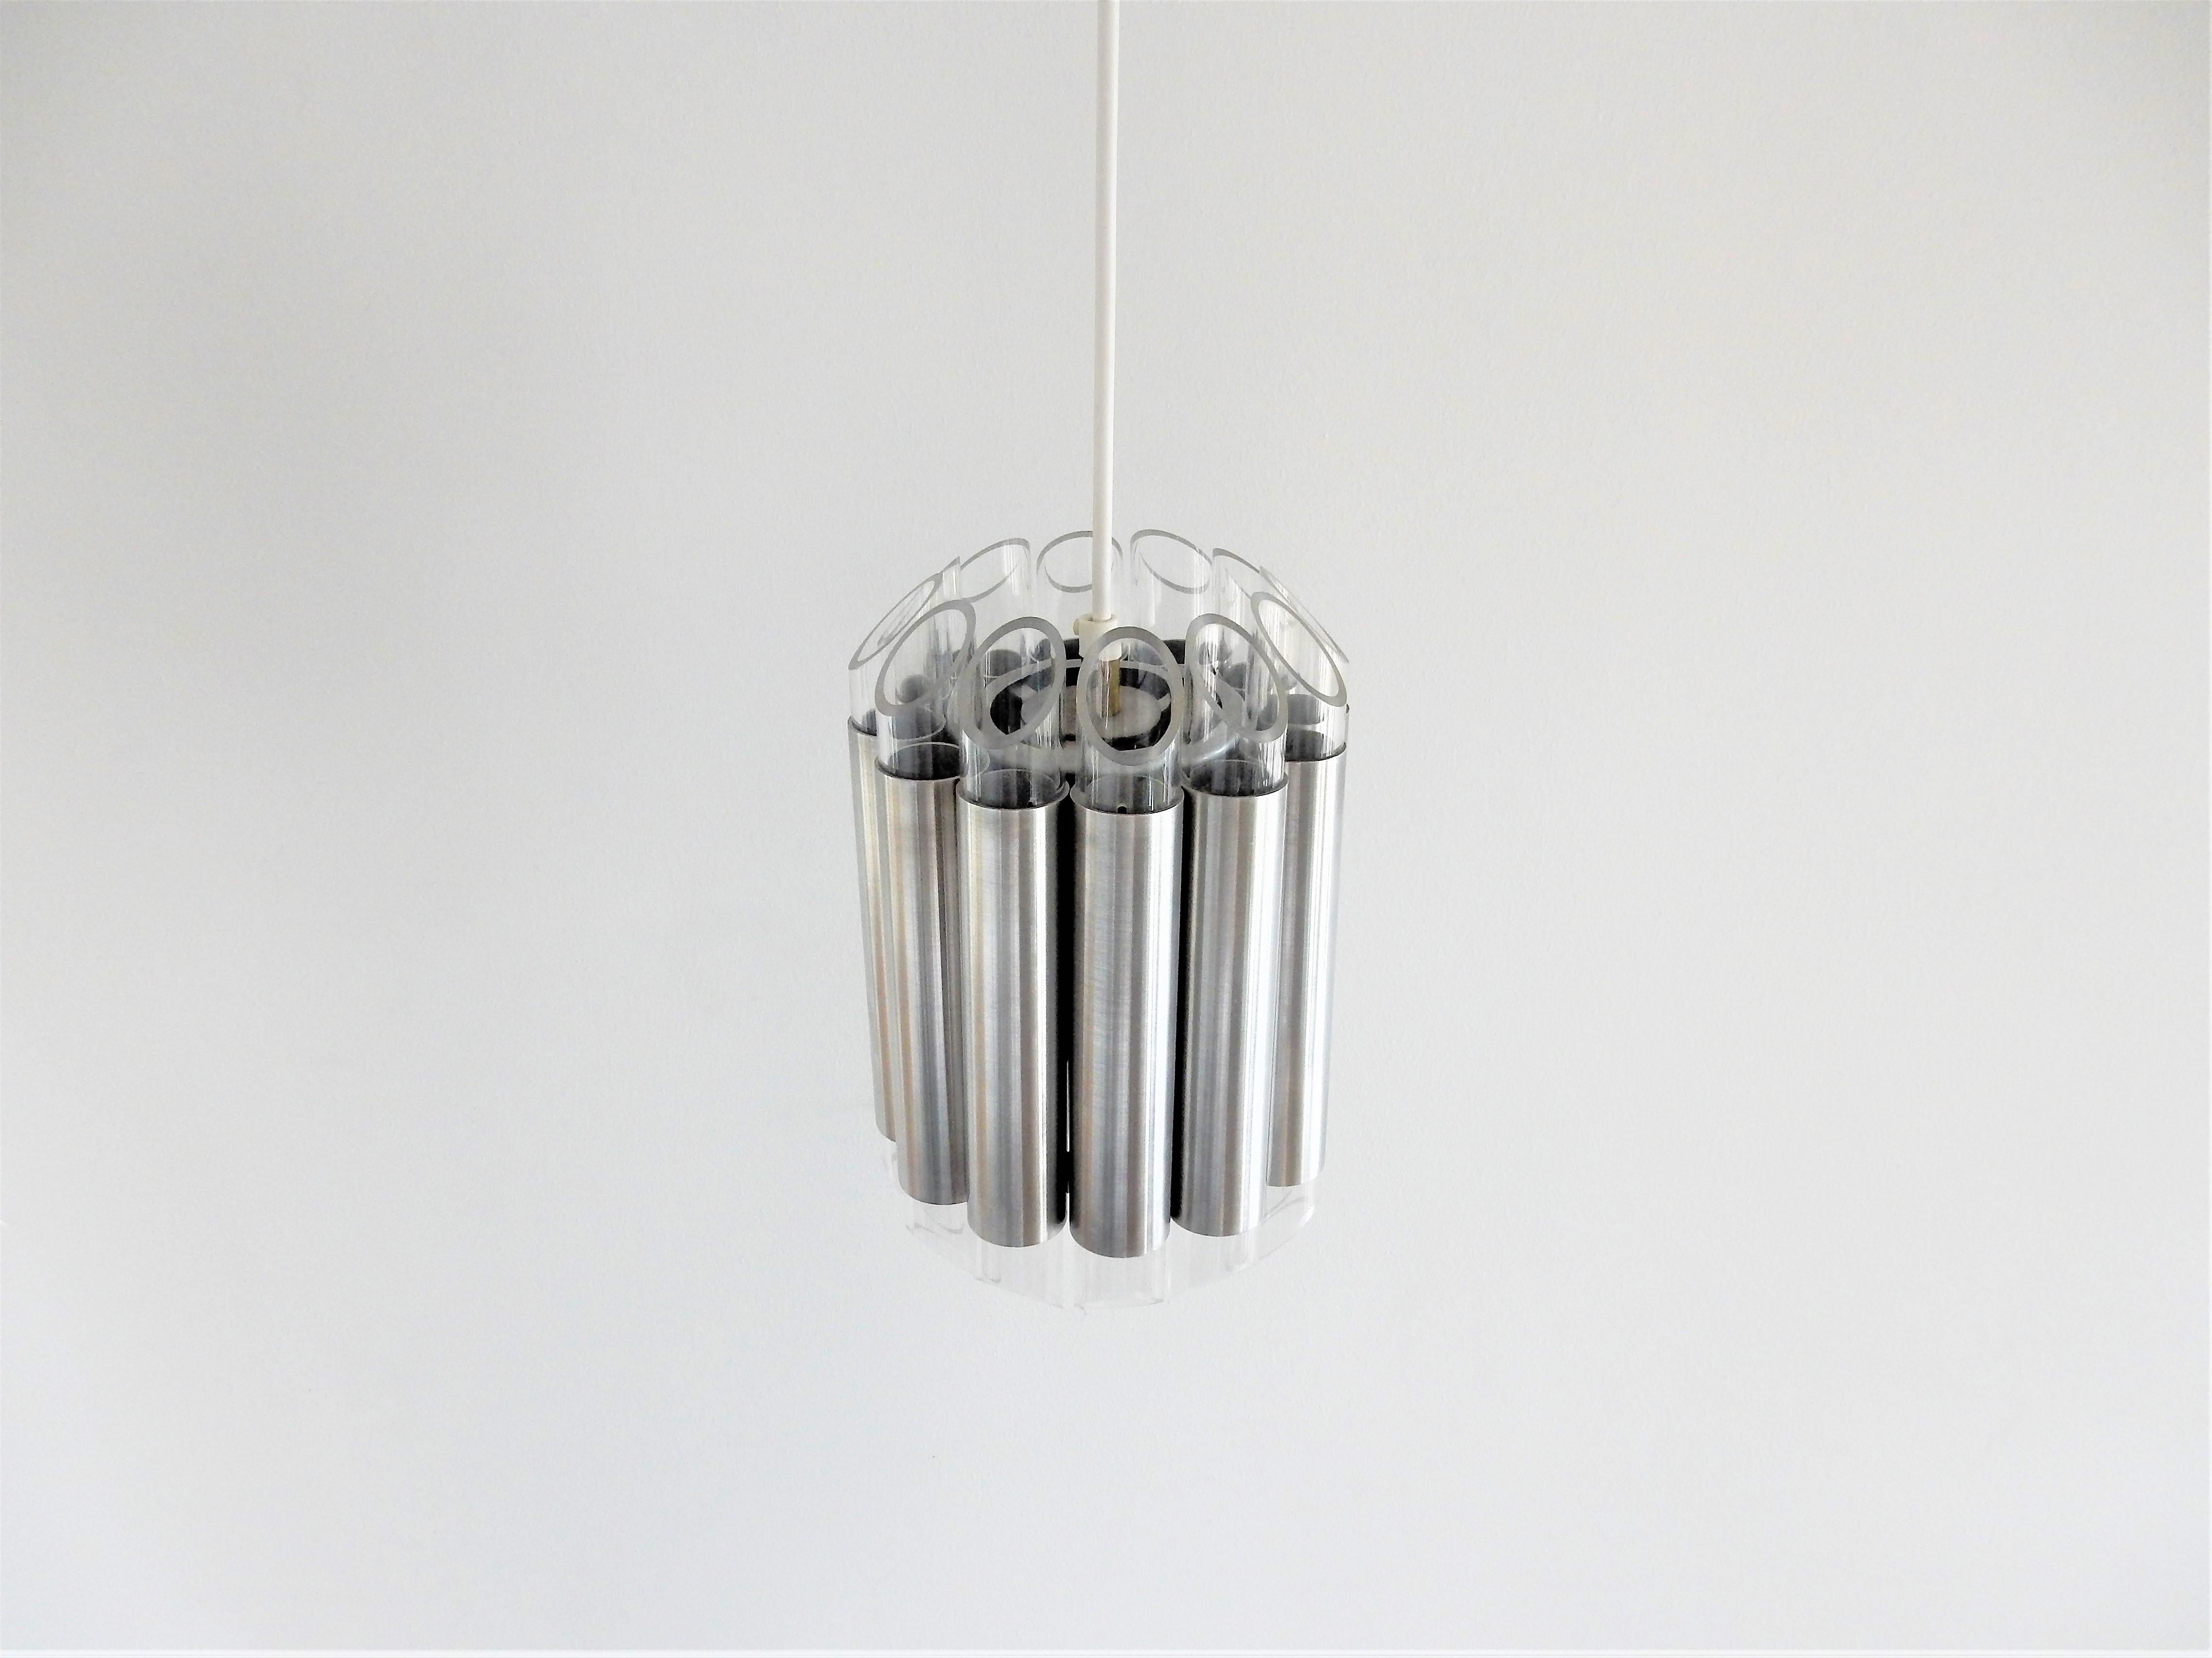 This stunning 'Septiem' pendant lamp was designed by RAAK Amsterdam in the 1960s. The light source is surrounded by aluminum and acrylic tubes. The tubes have polished facets on both ends that diffuse and spread a beautiful and mysterious light.